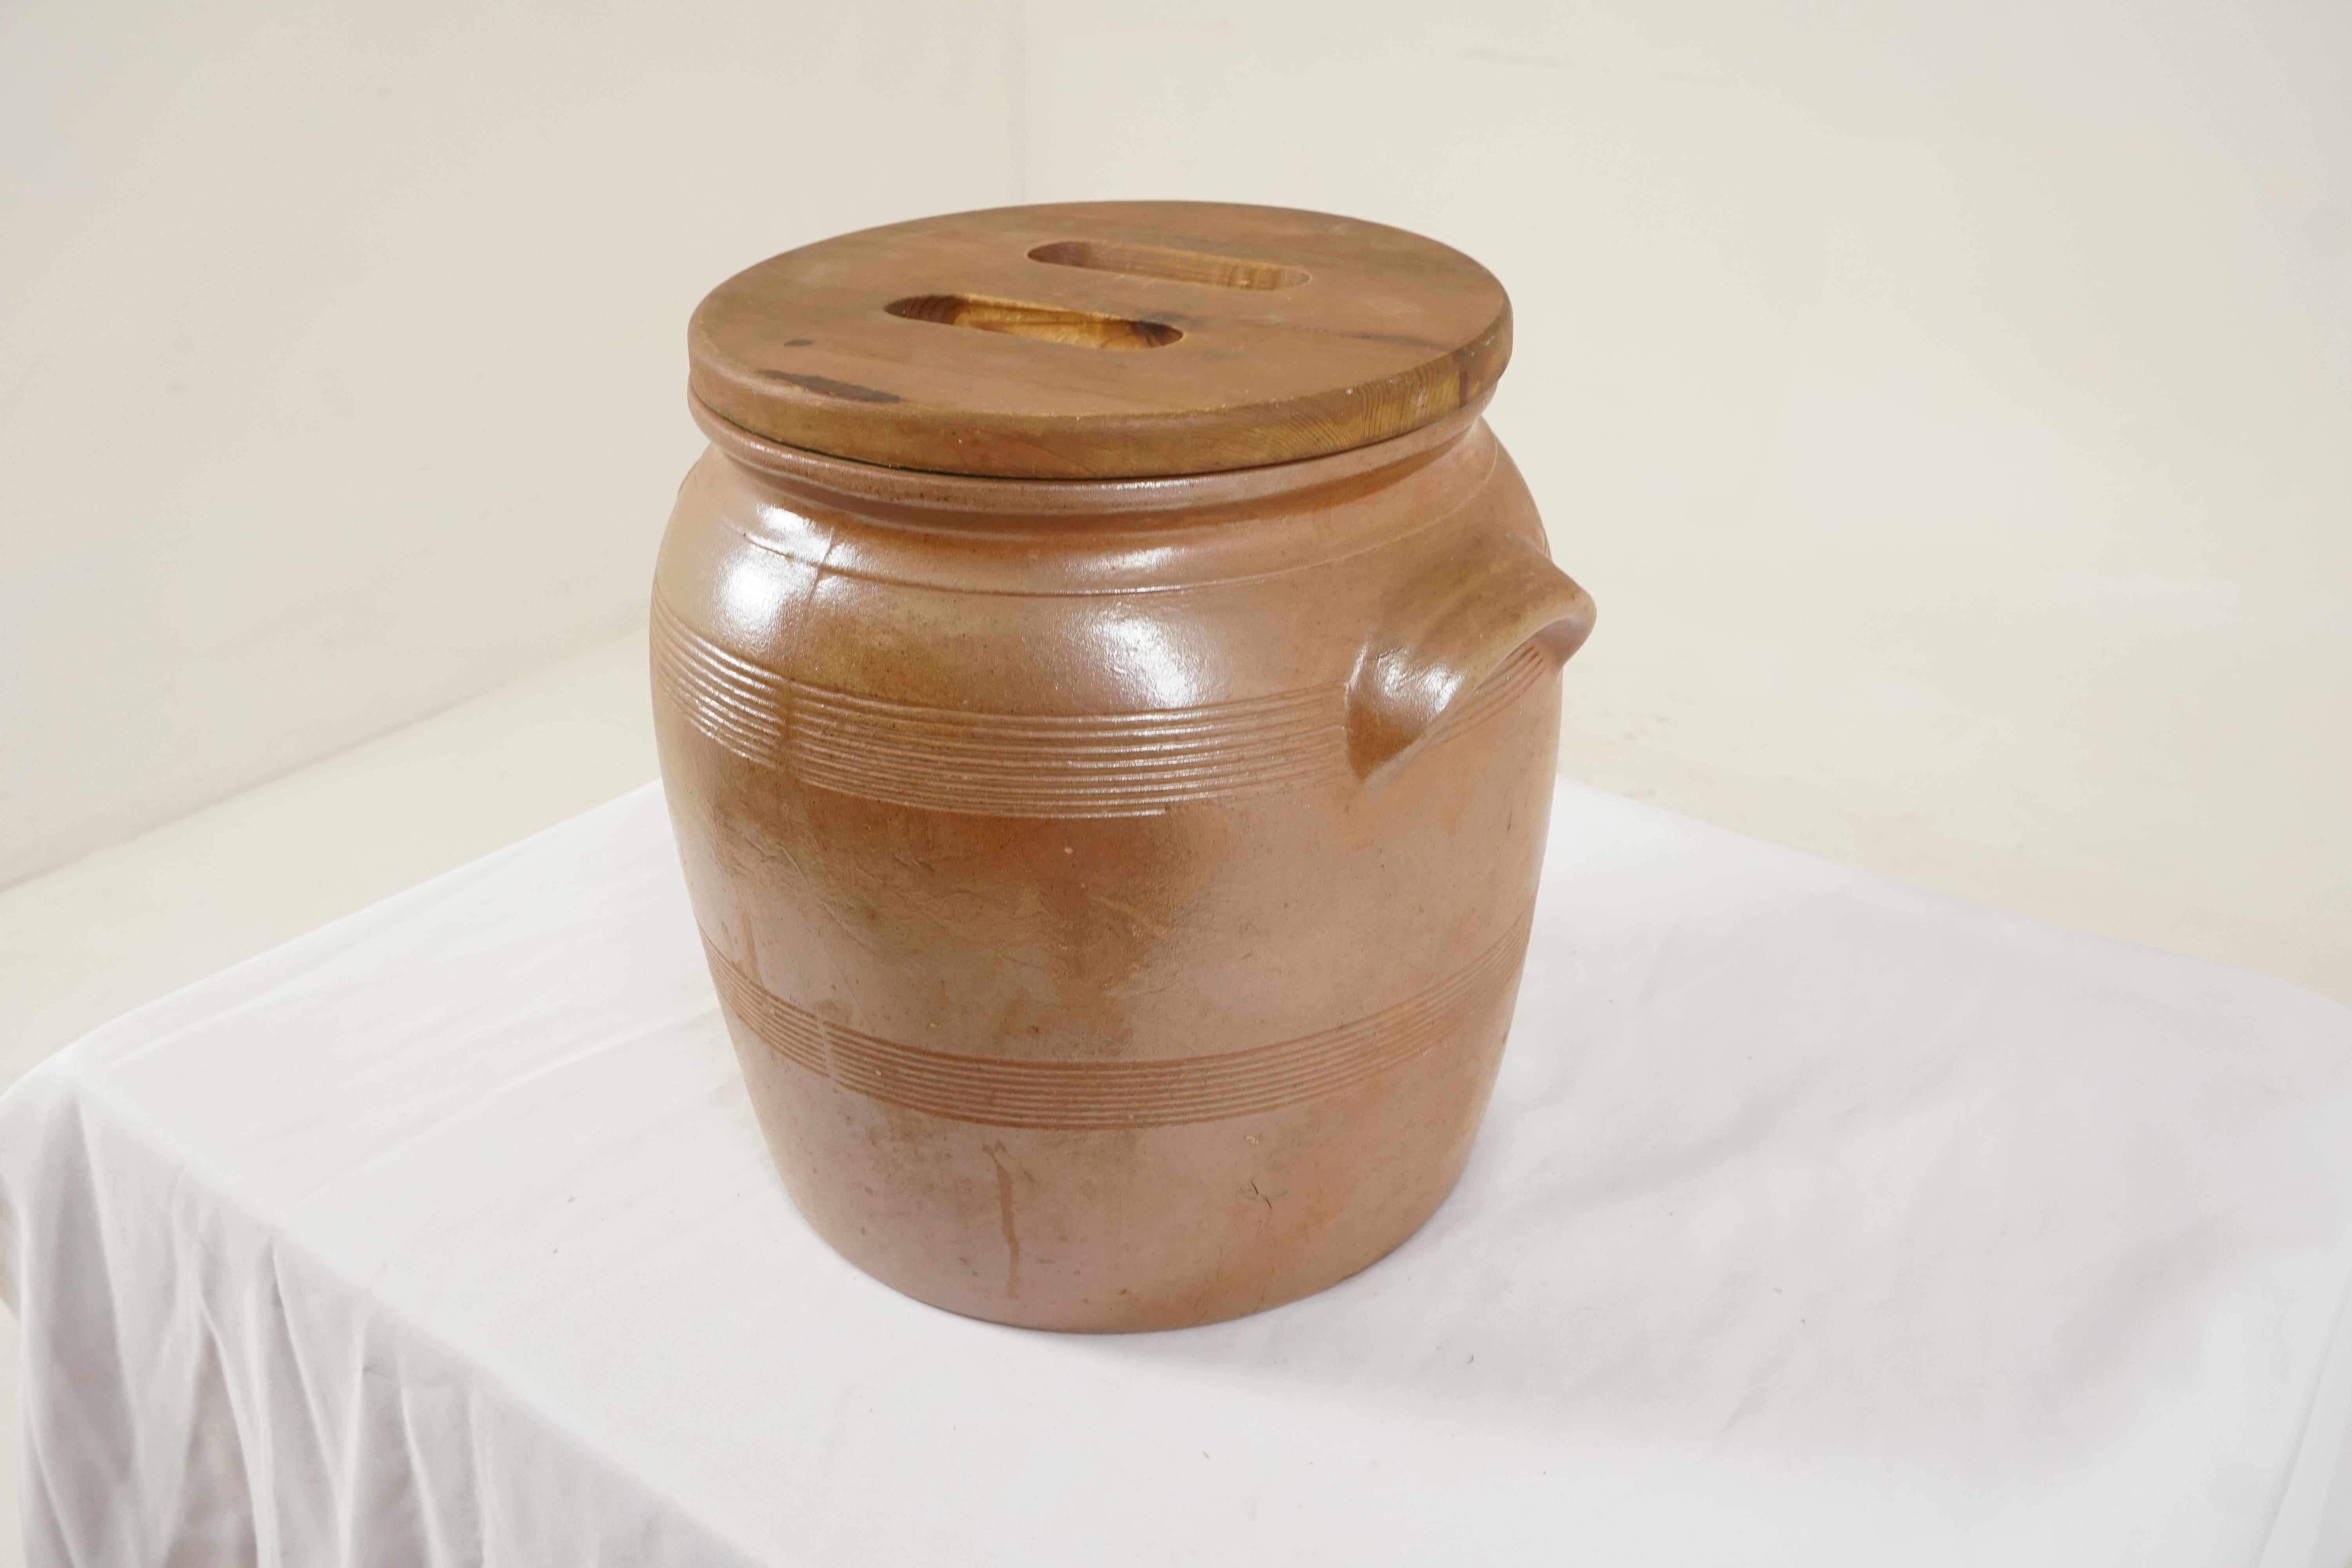 Antique large Scottish Earthenware crock, pickling barrel, Pine Lid, Scotland 1920, B1747y

Scotland 1920
Circular in shape
Pine lid with cut-outs to the top
The barrel has lifting handles to the sides
Rings around the top and near the